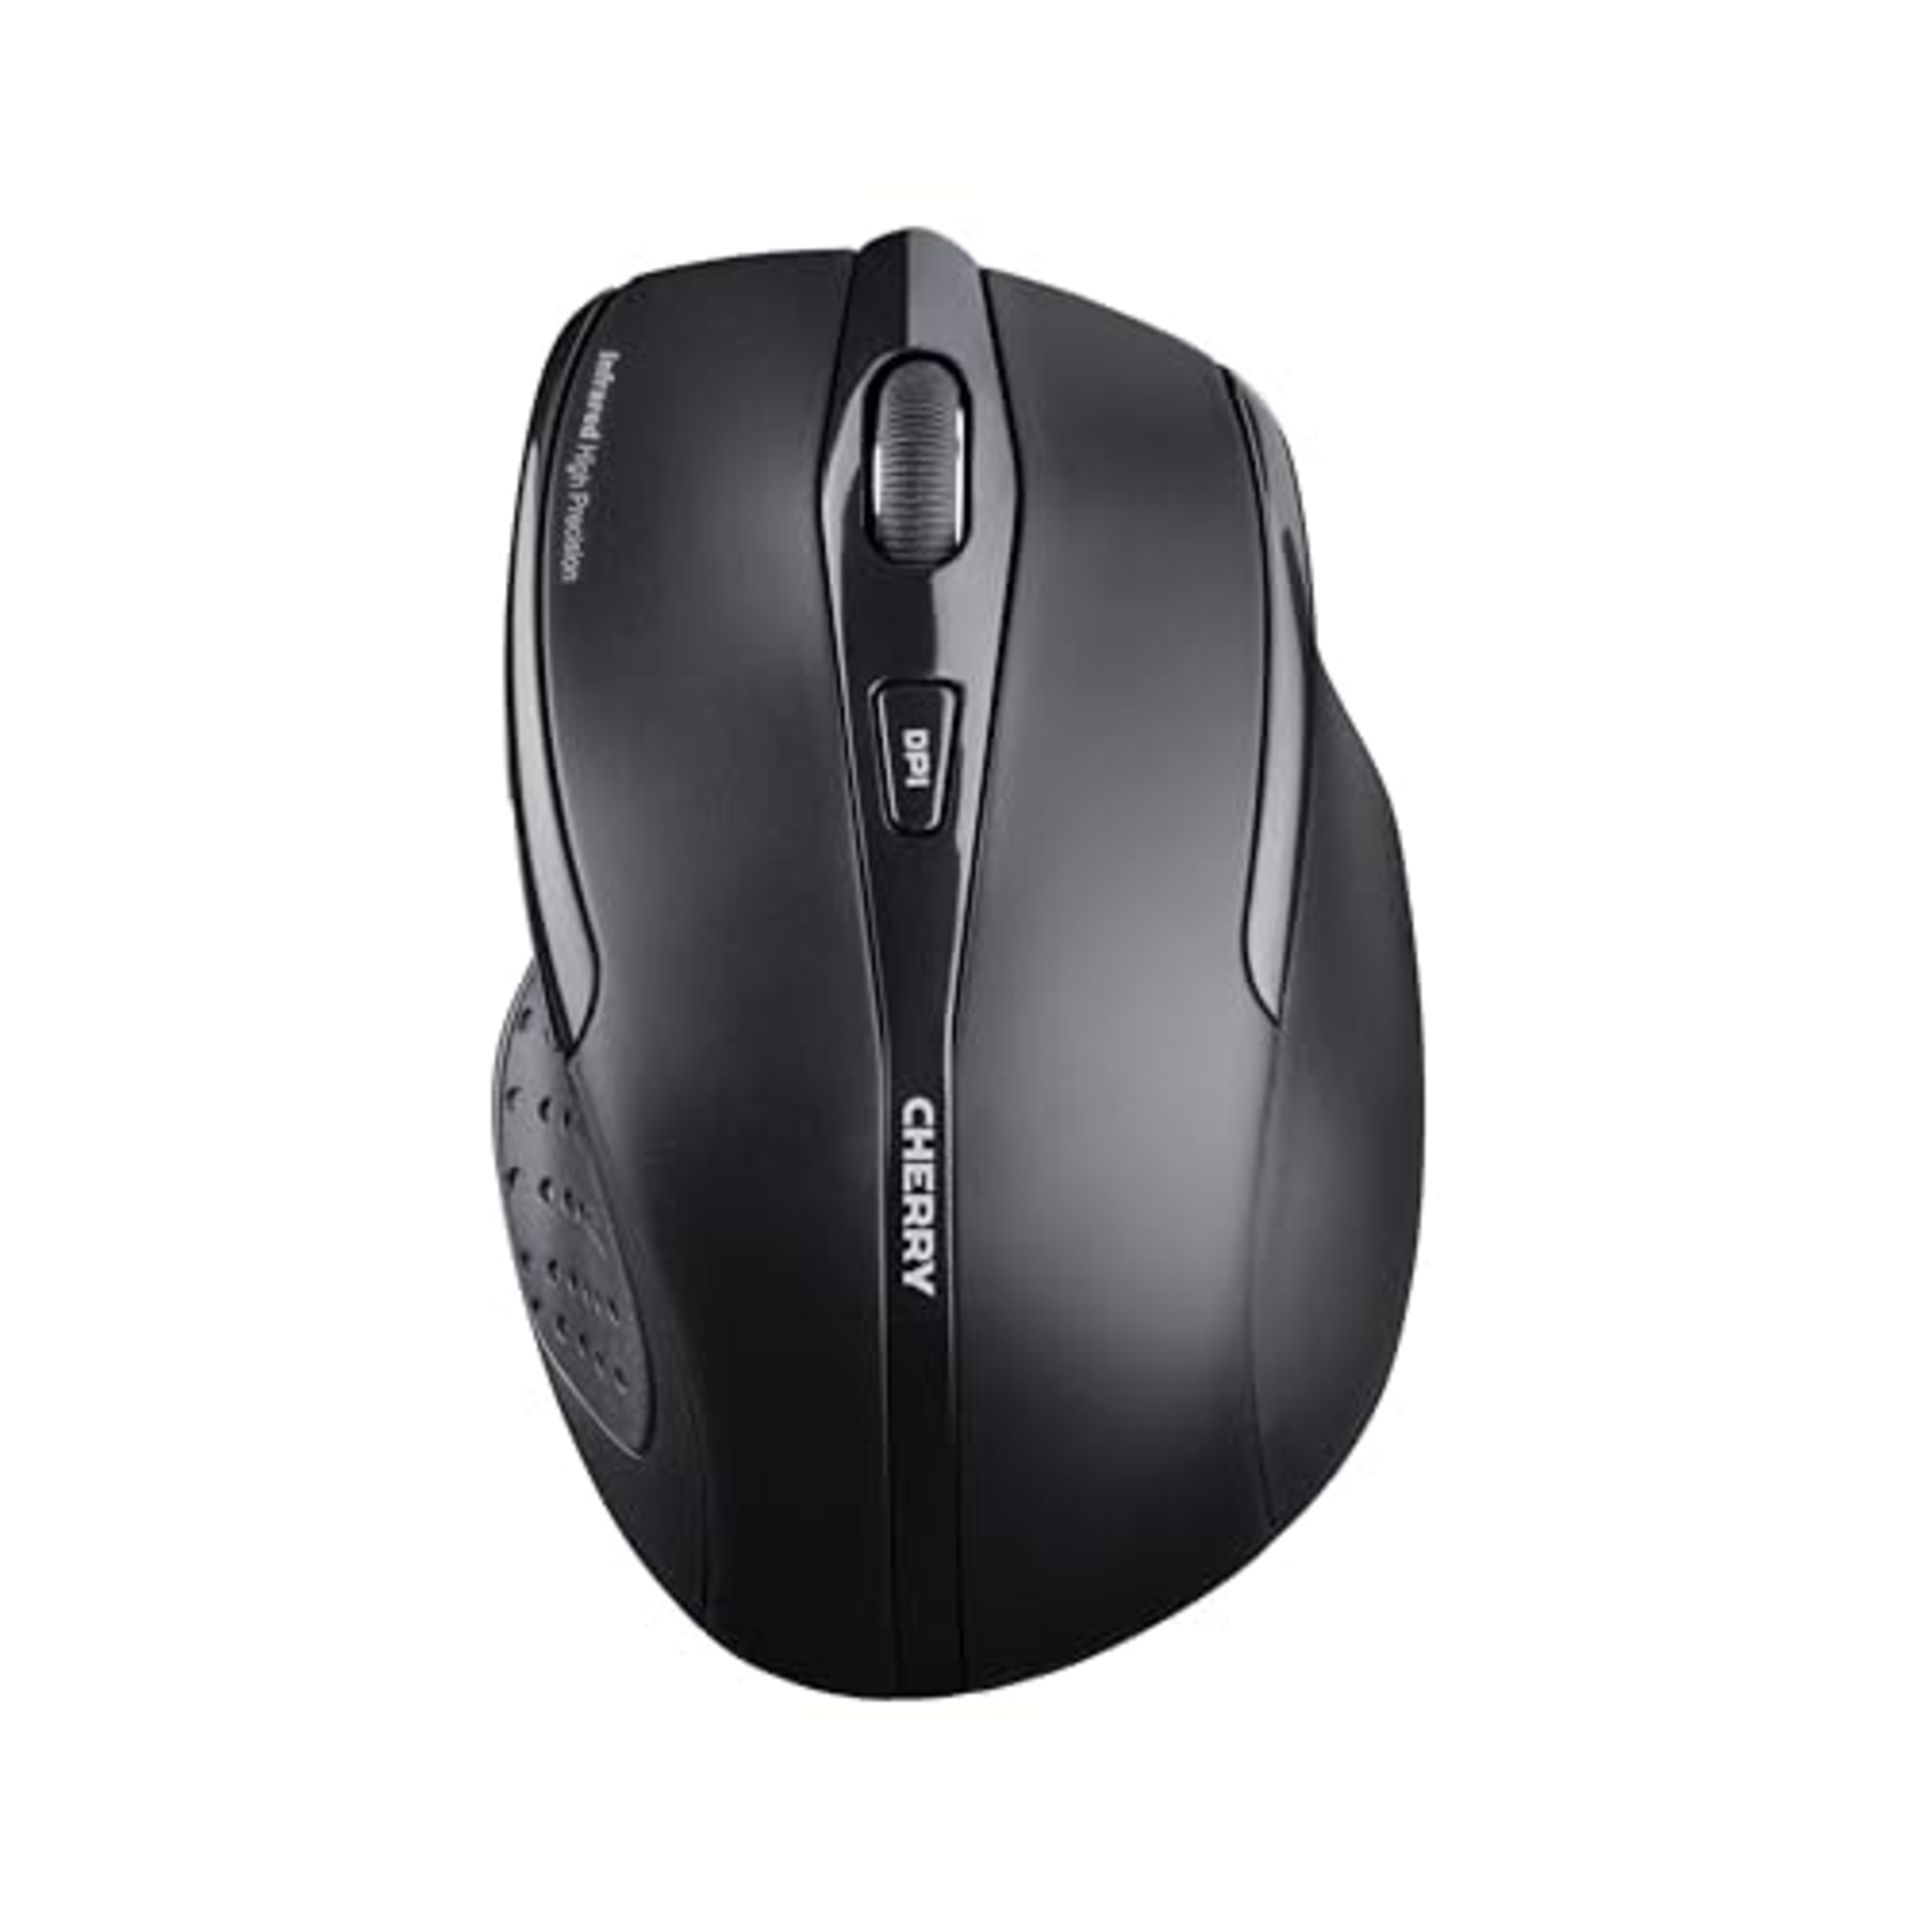 CHERRY MW 3000, wireless mouse, ergonomic right-handed mouse, 6 buttons: infrared sens